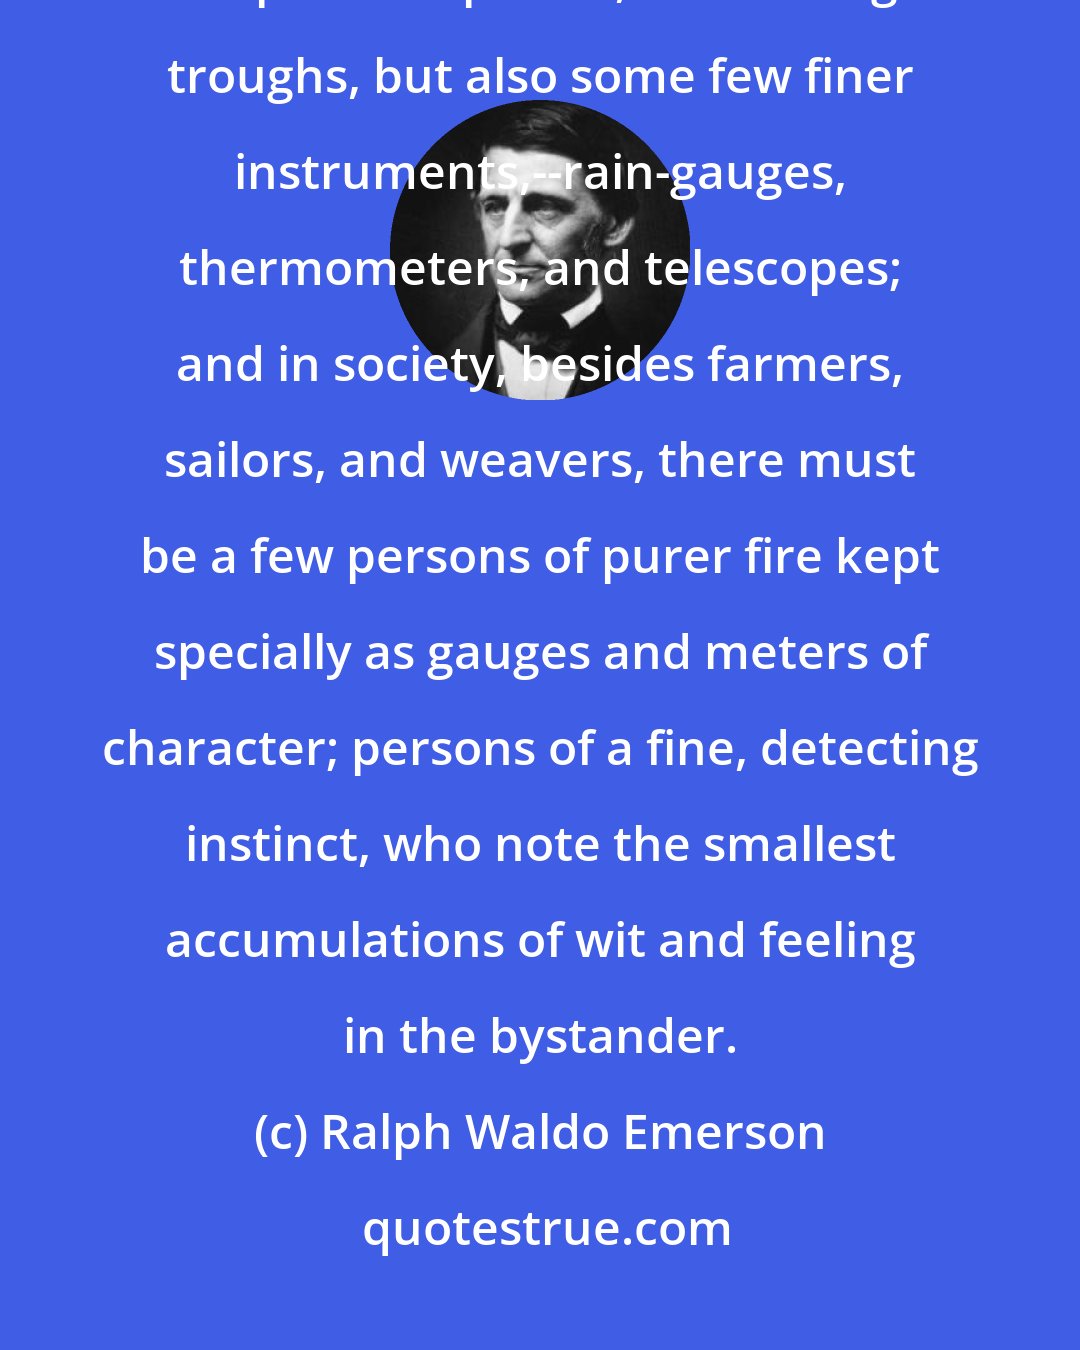 Ralph Waldo Emerson: In our Mechanics' Fair, there must be not only bridges, ploughs, carpenter's planes, and baking troughs, but also some few finer instruments,--rain-gauges, thermometers, and telescopes; and in society, besides farmers, sailors, and weavers, there must be a few persons of purer fire kept specially as gauges and meters of character; persons of a fine, detecting instinct, who note the smallest accumulations of wit and feeling in the bystander.